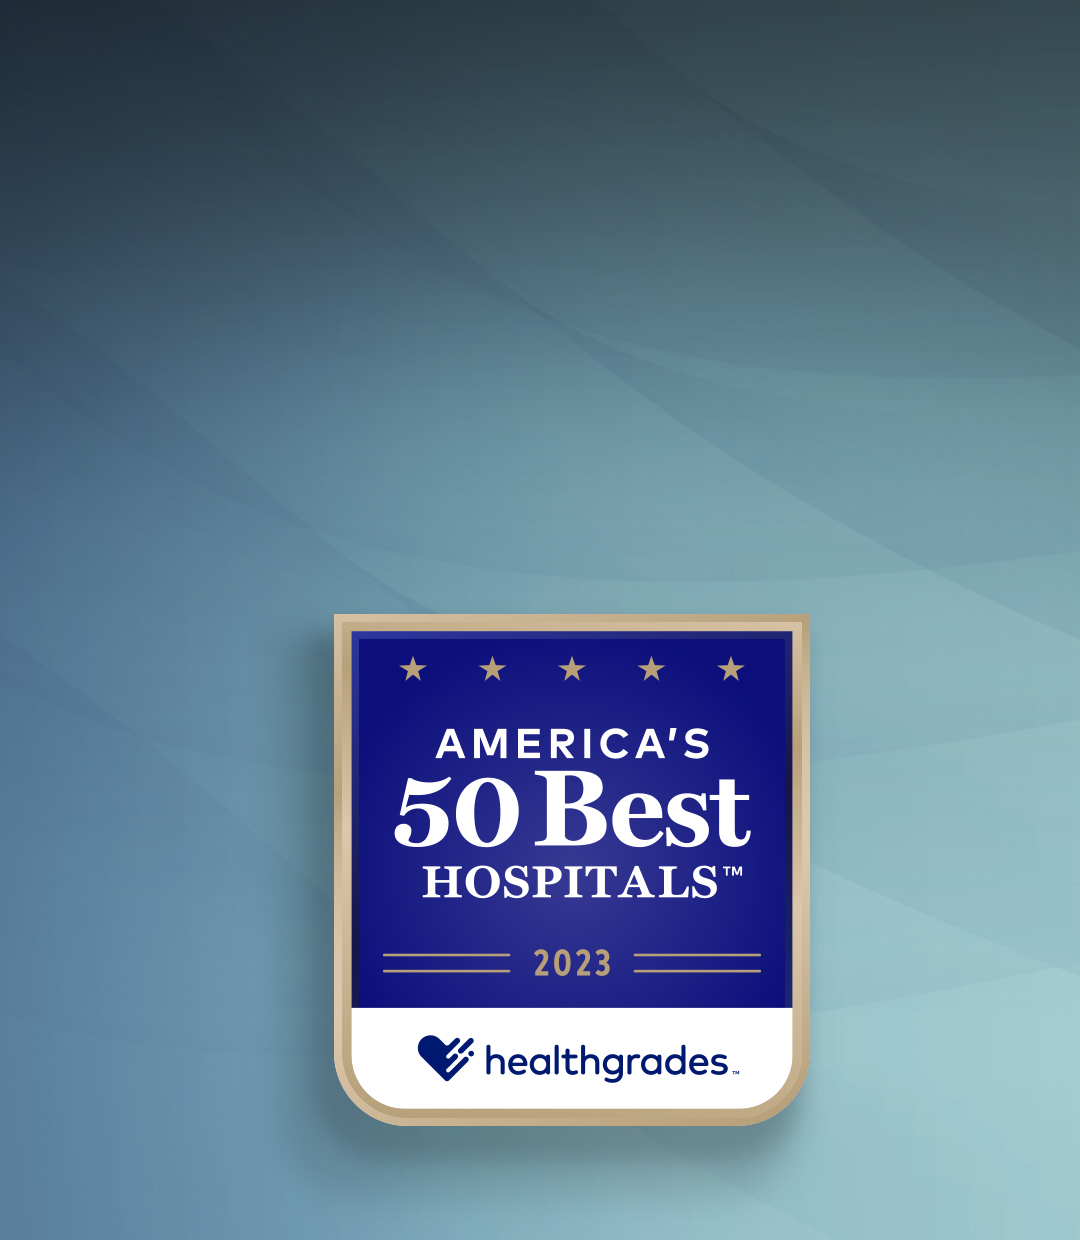 HEALTHGRADES RANKINGS ARE IN!